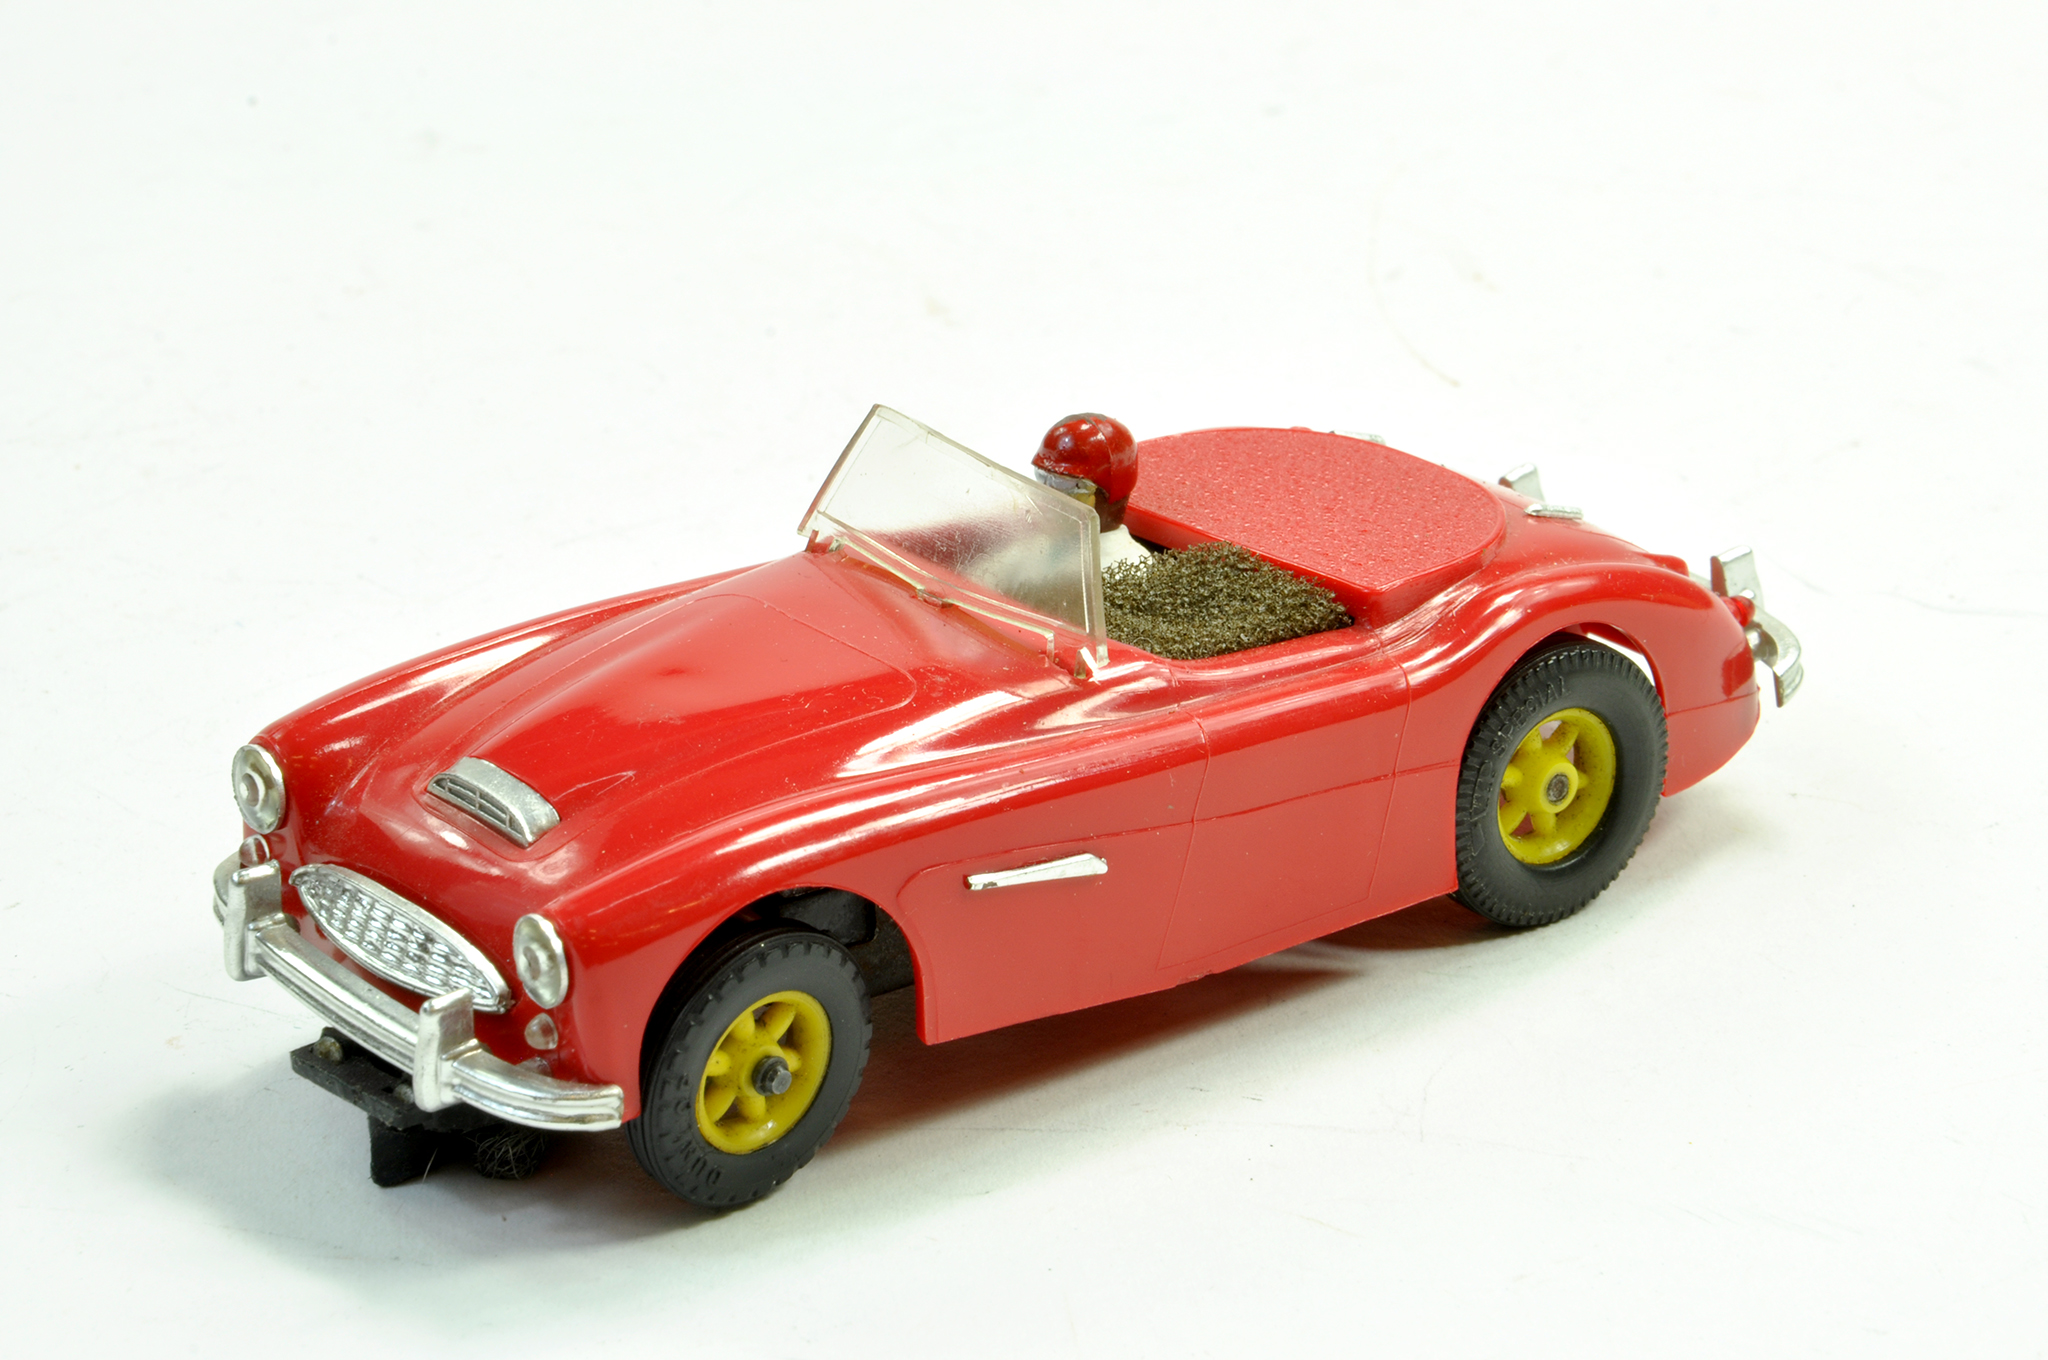 Victory Industries VIP Raceways Slot Car comprising Austin Healey in red with yellow hubs,